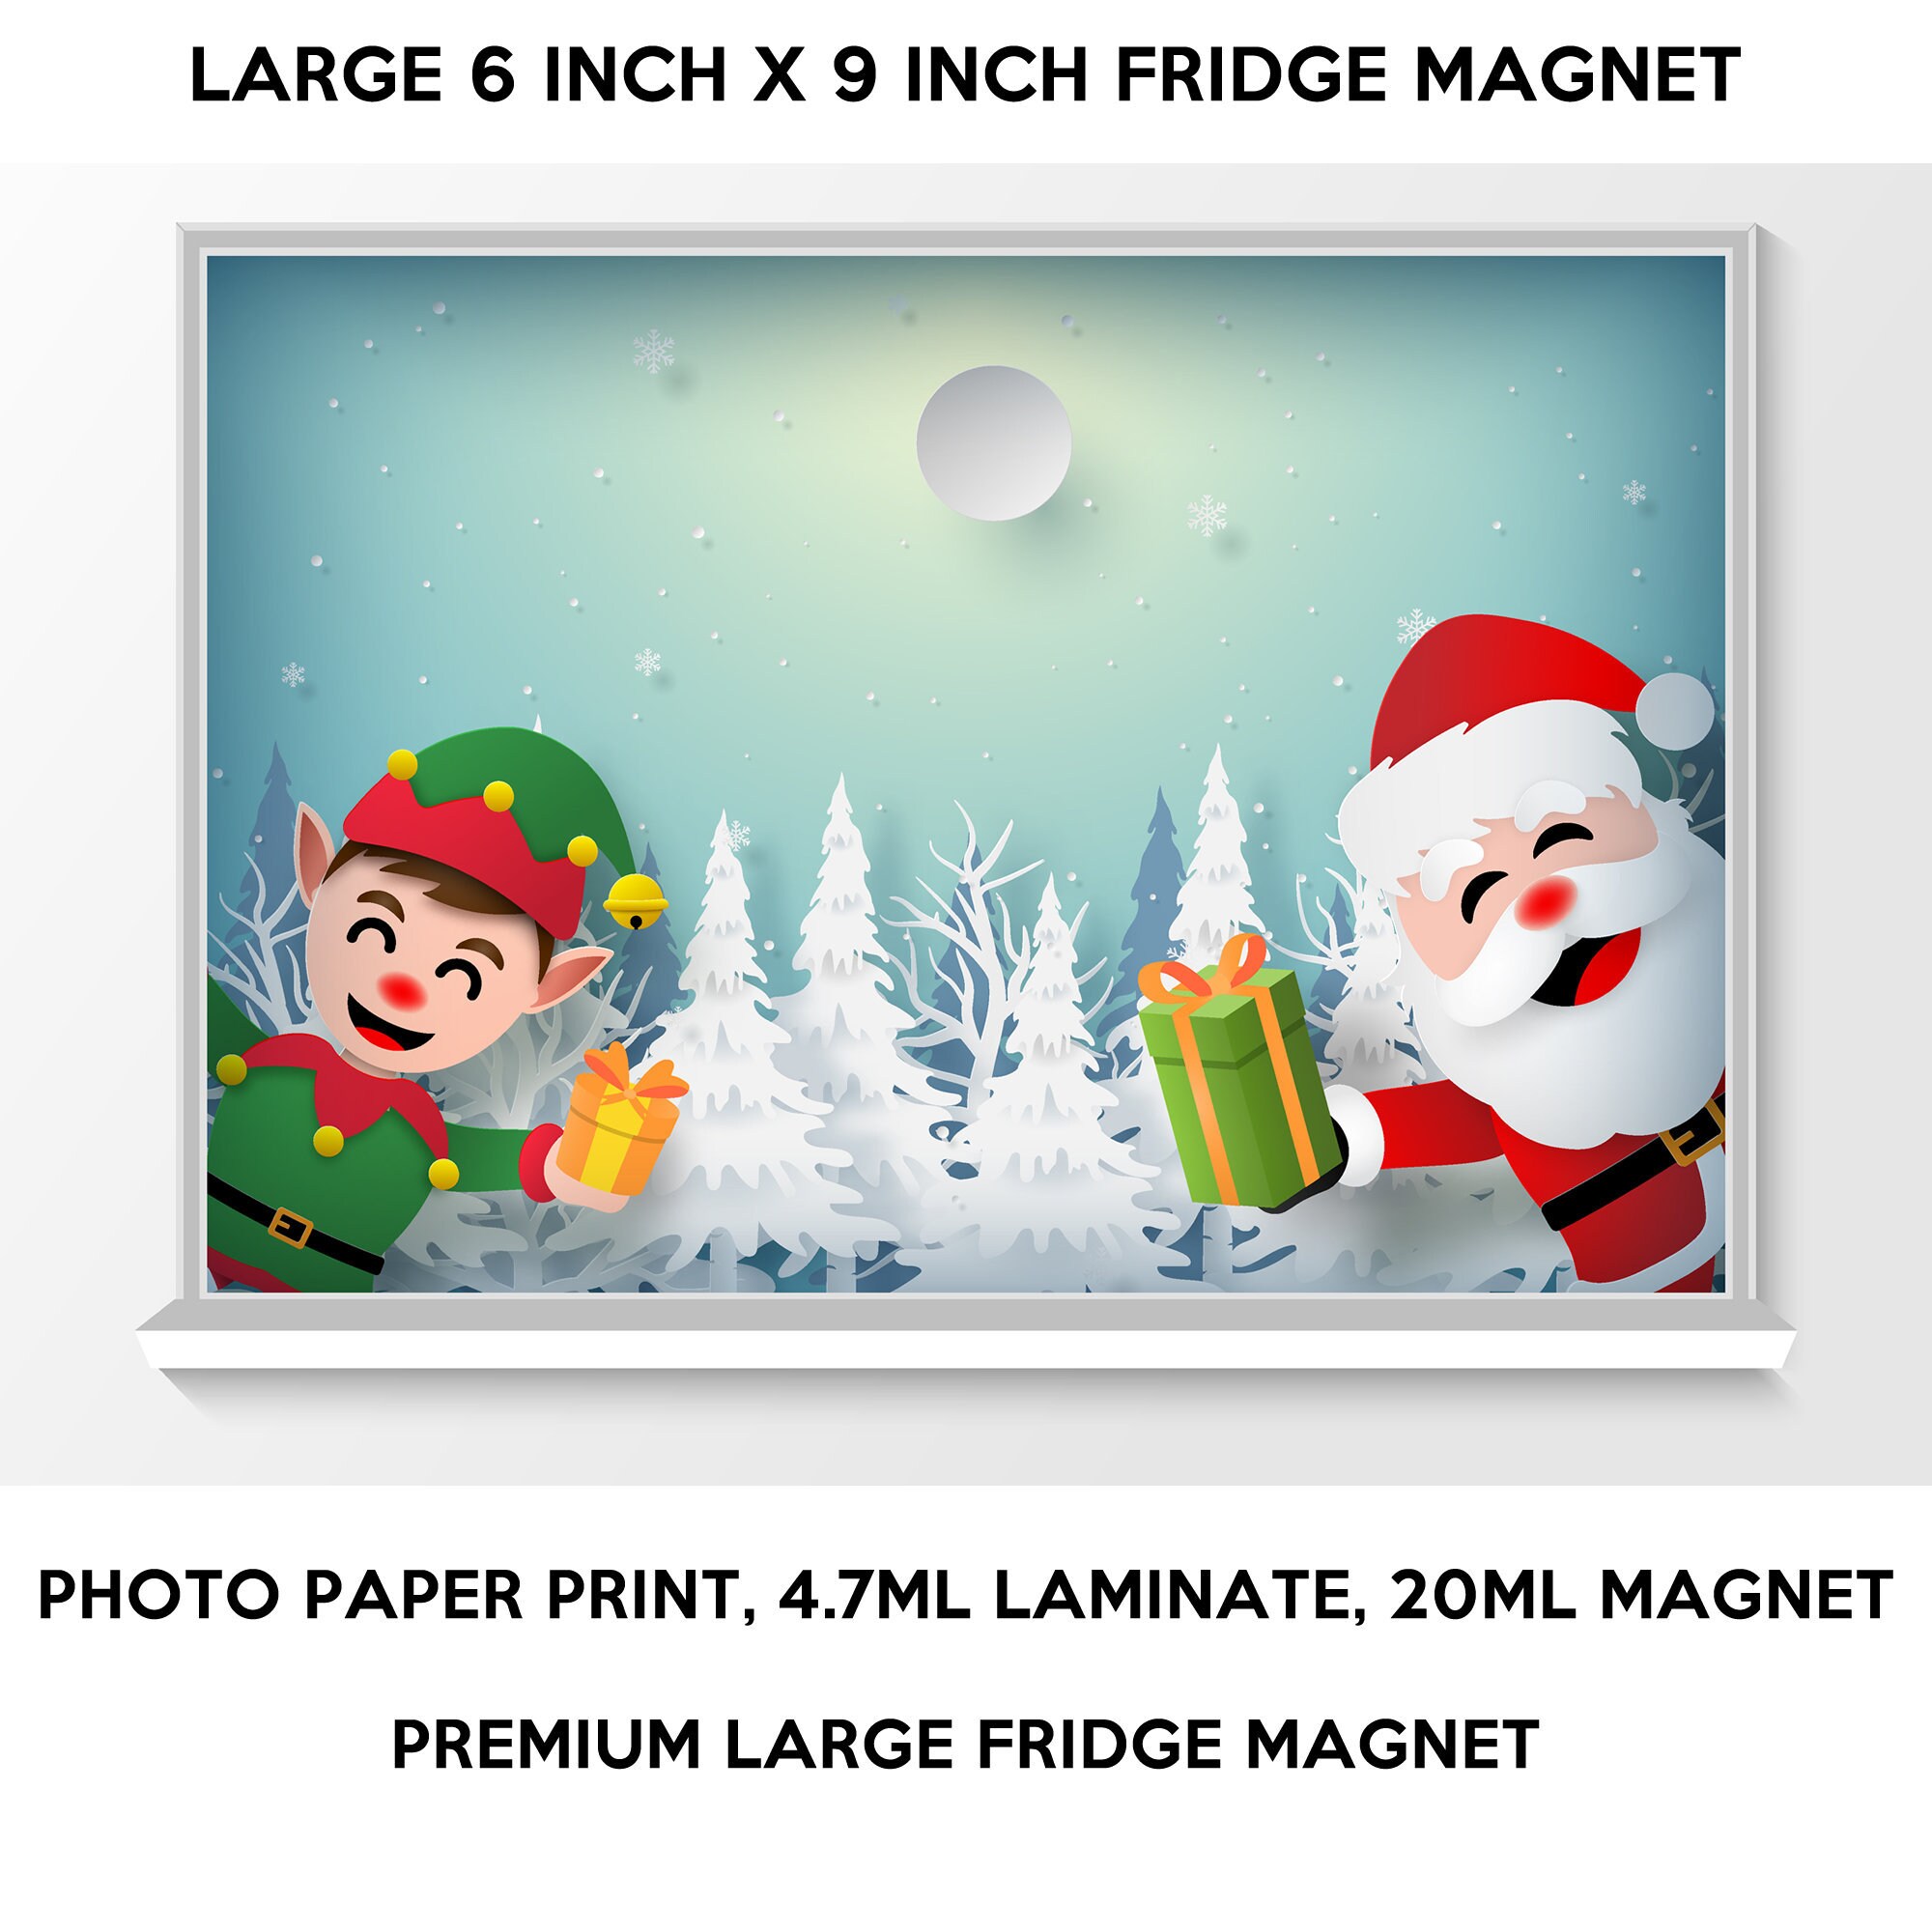 Christmas fridge magnet, large 6x9 inch premium fridge magnet that stands out this holiday season